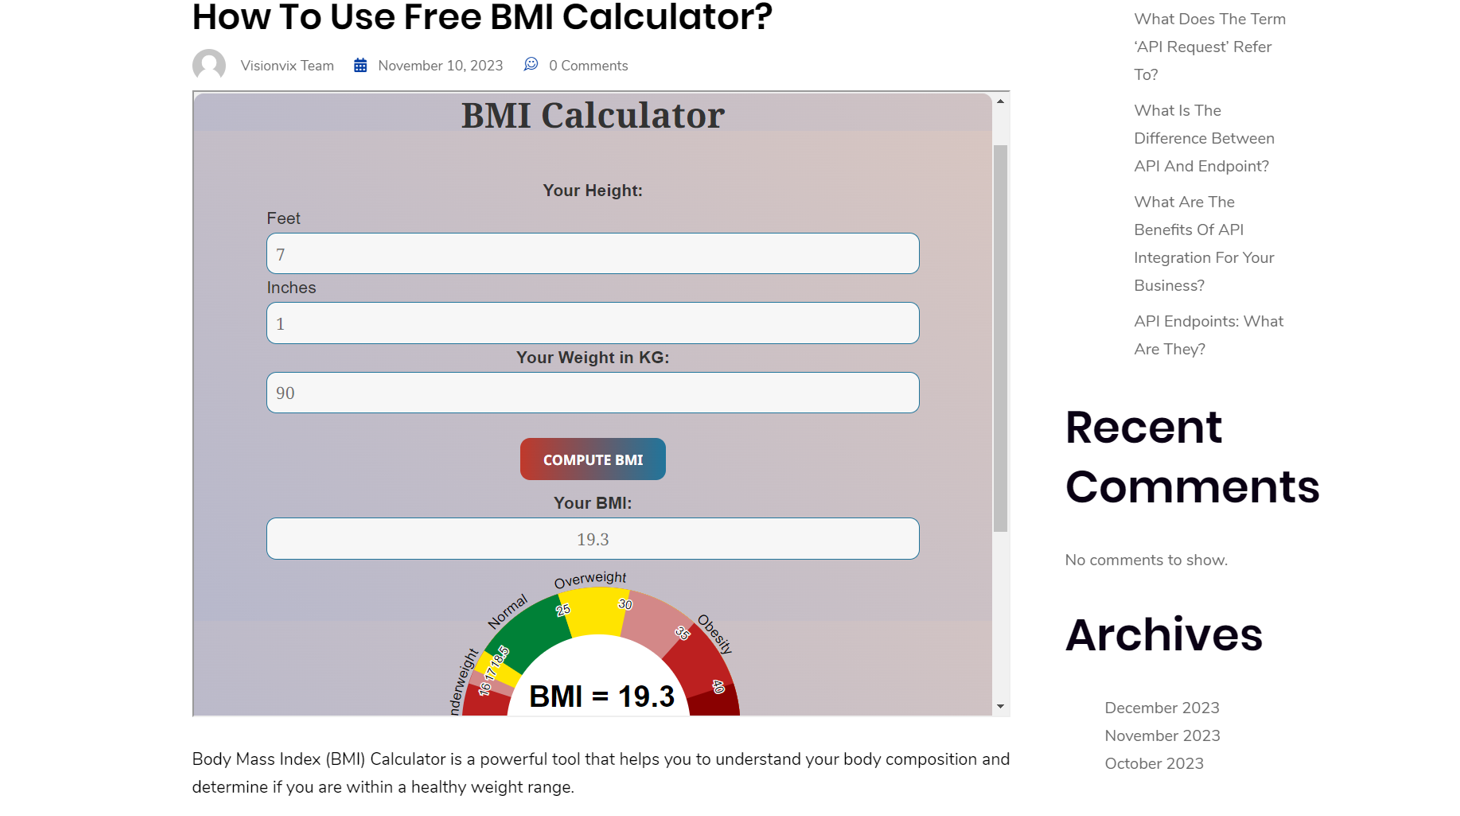 VisionVix Apps embedding the calculator as a widget into your blog or site for free